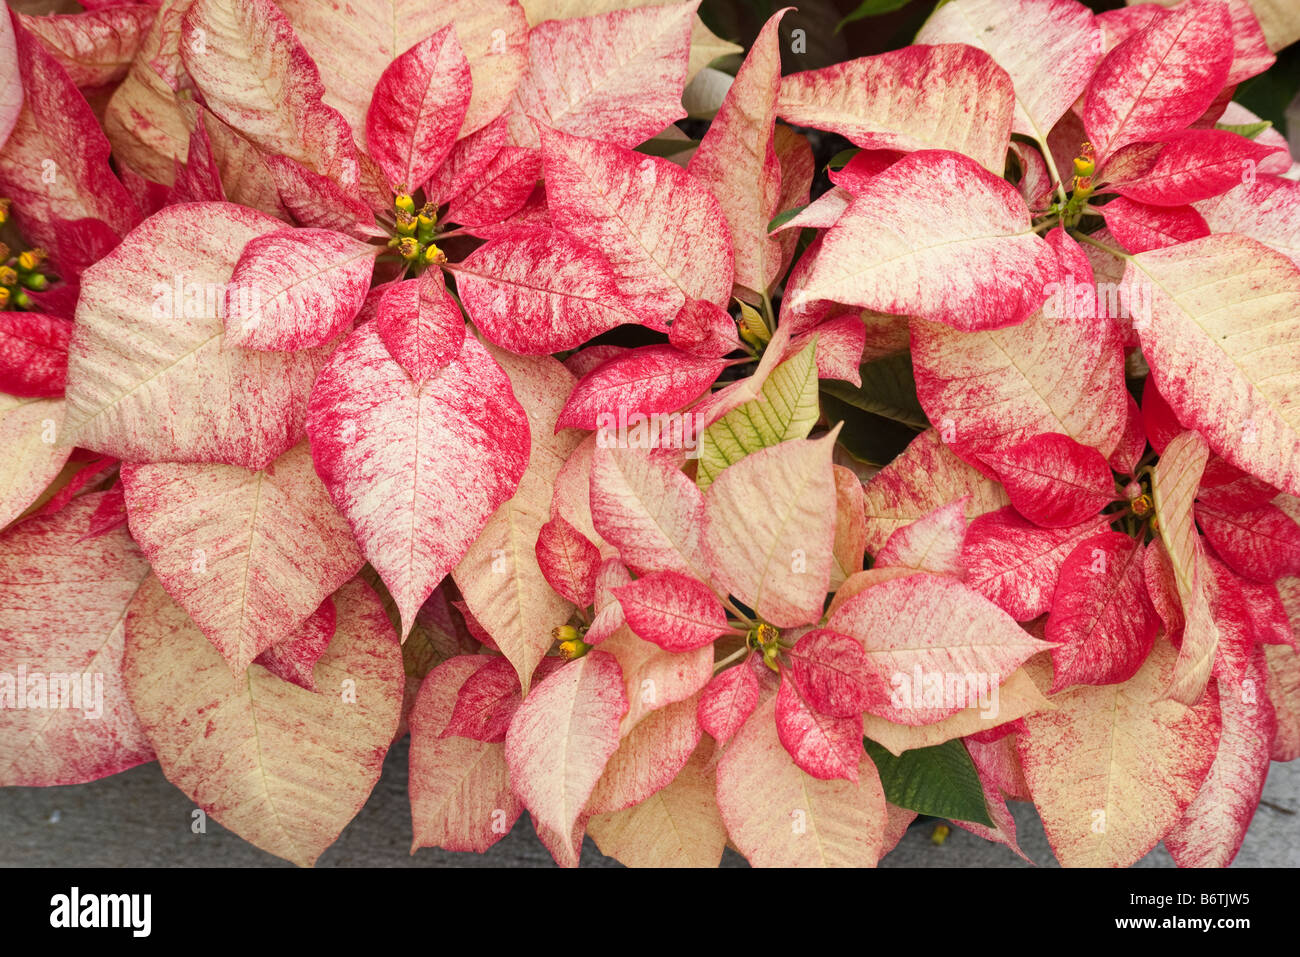 Group of red and white variegated Poinsettia Stock Photo